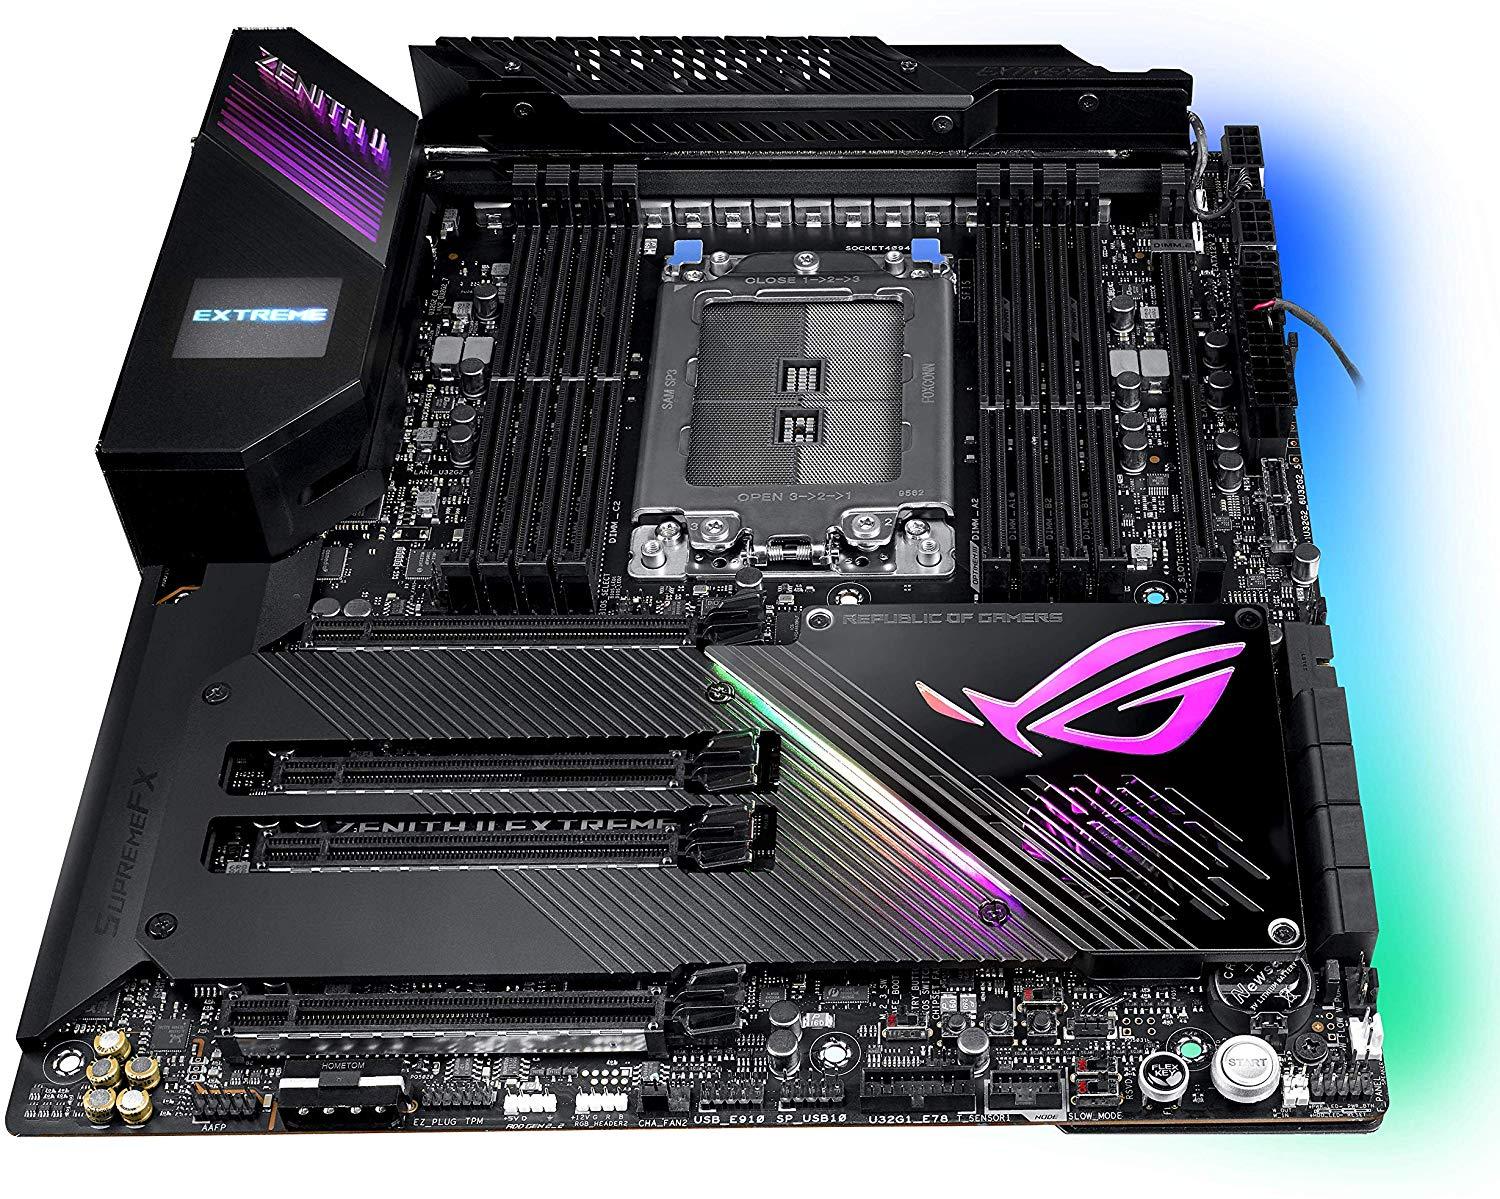 Asus ROG TRX40 AMD Zenith II Extreme Alpha Motherboard - Store 974 | ستور ٩٧٤